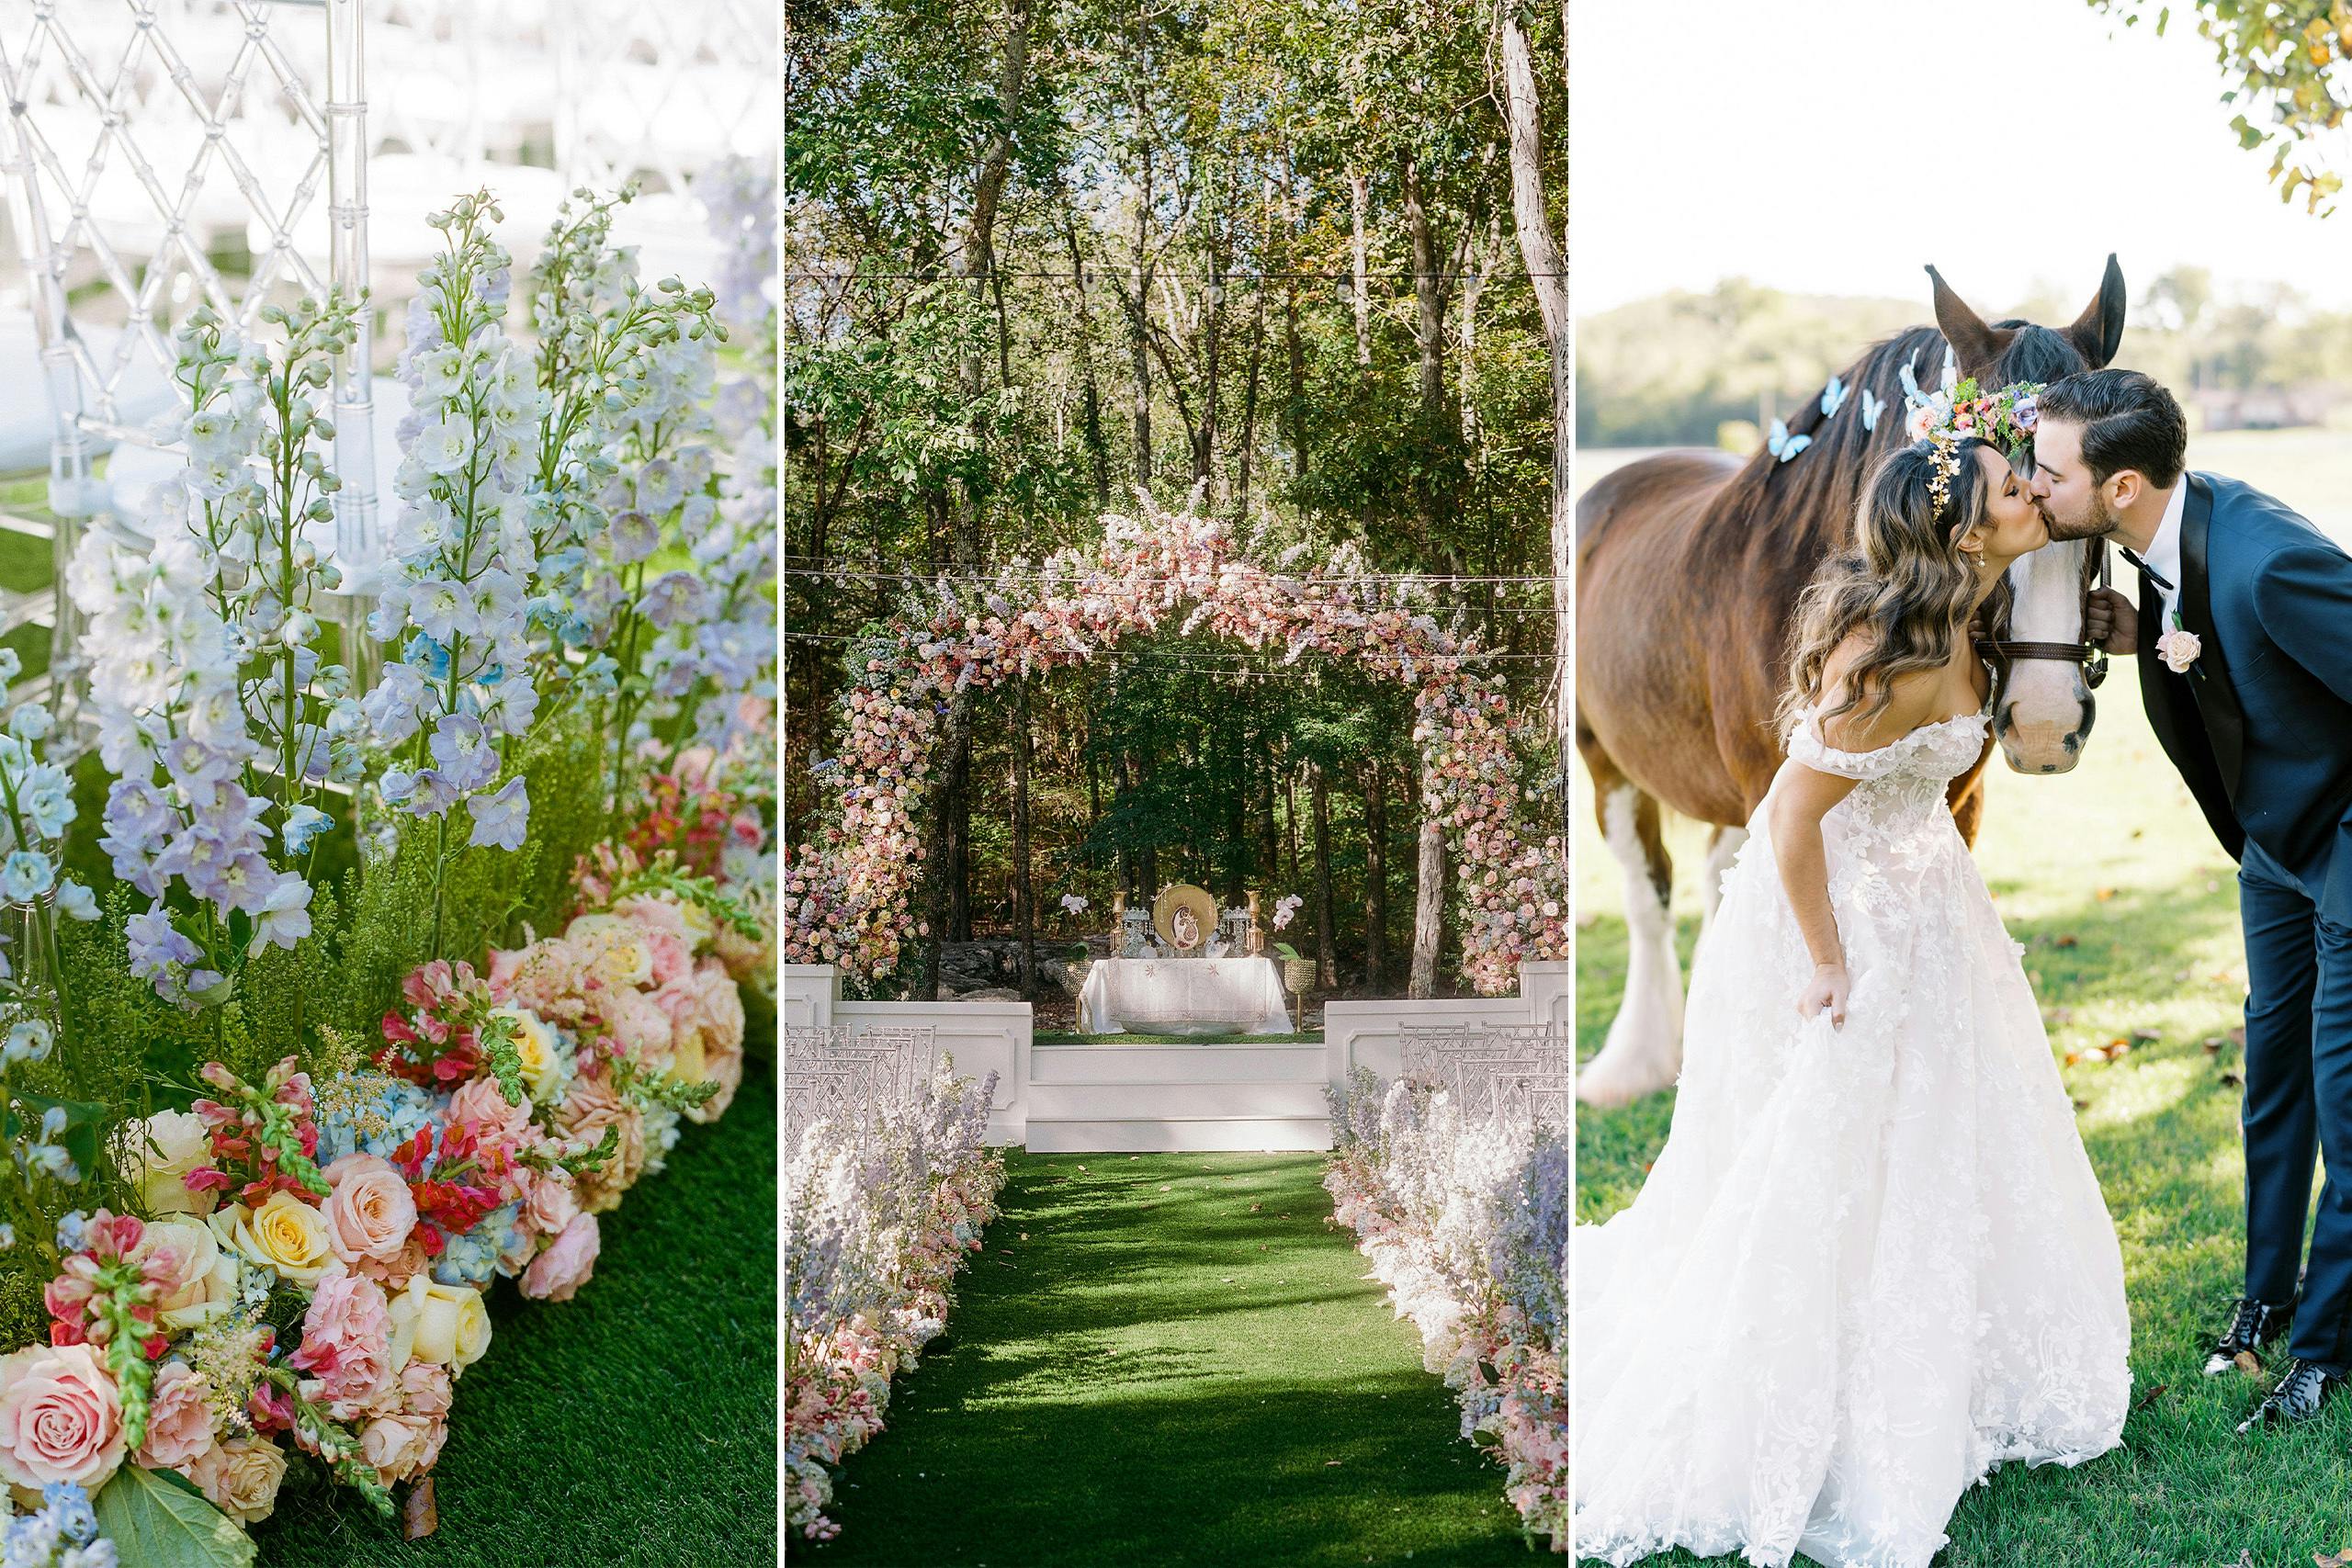 Artisanal Deco Micro Wedding Inspiration from Ever Something